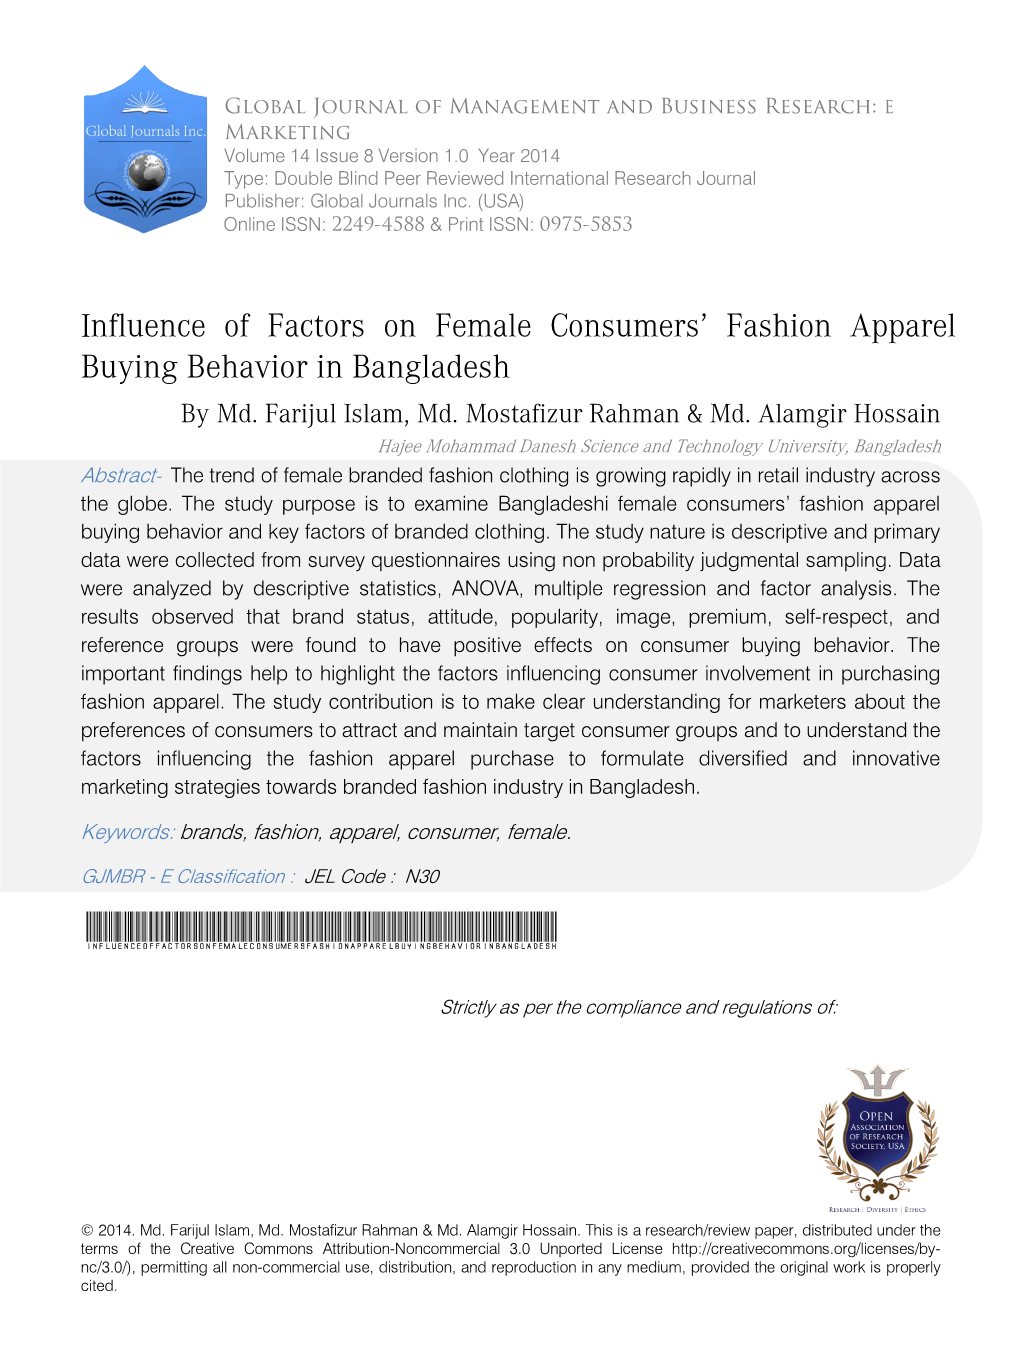 Influence of Factors on Female C Onsumers' Fashion Apparel\Buying